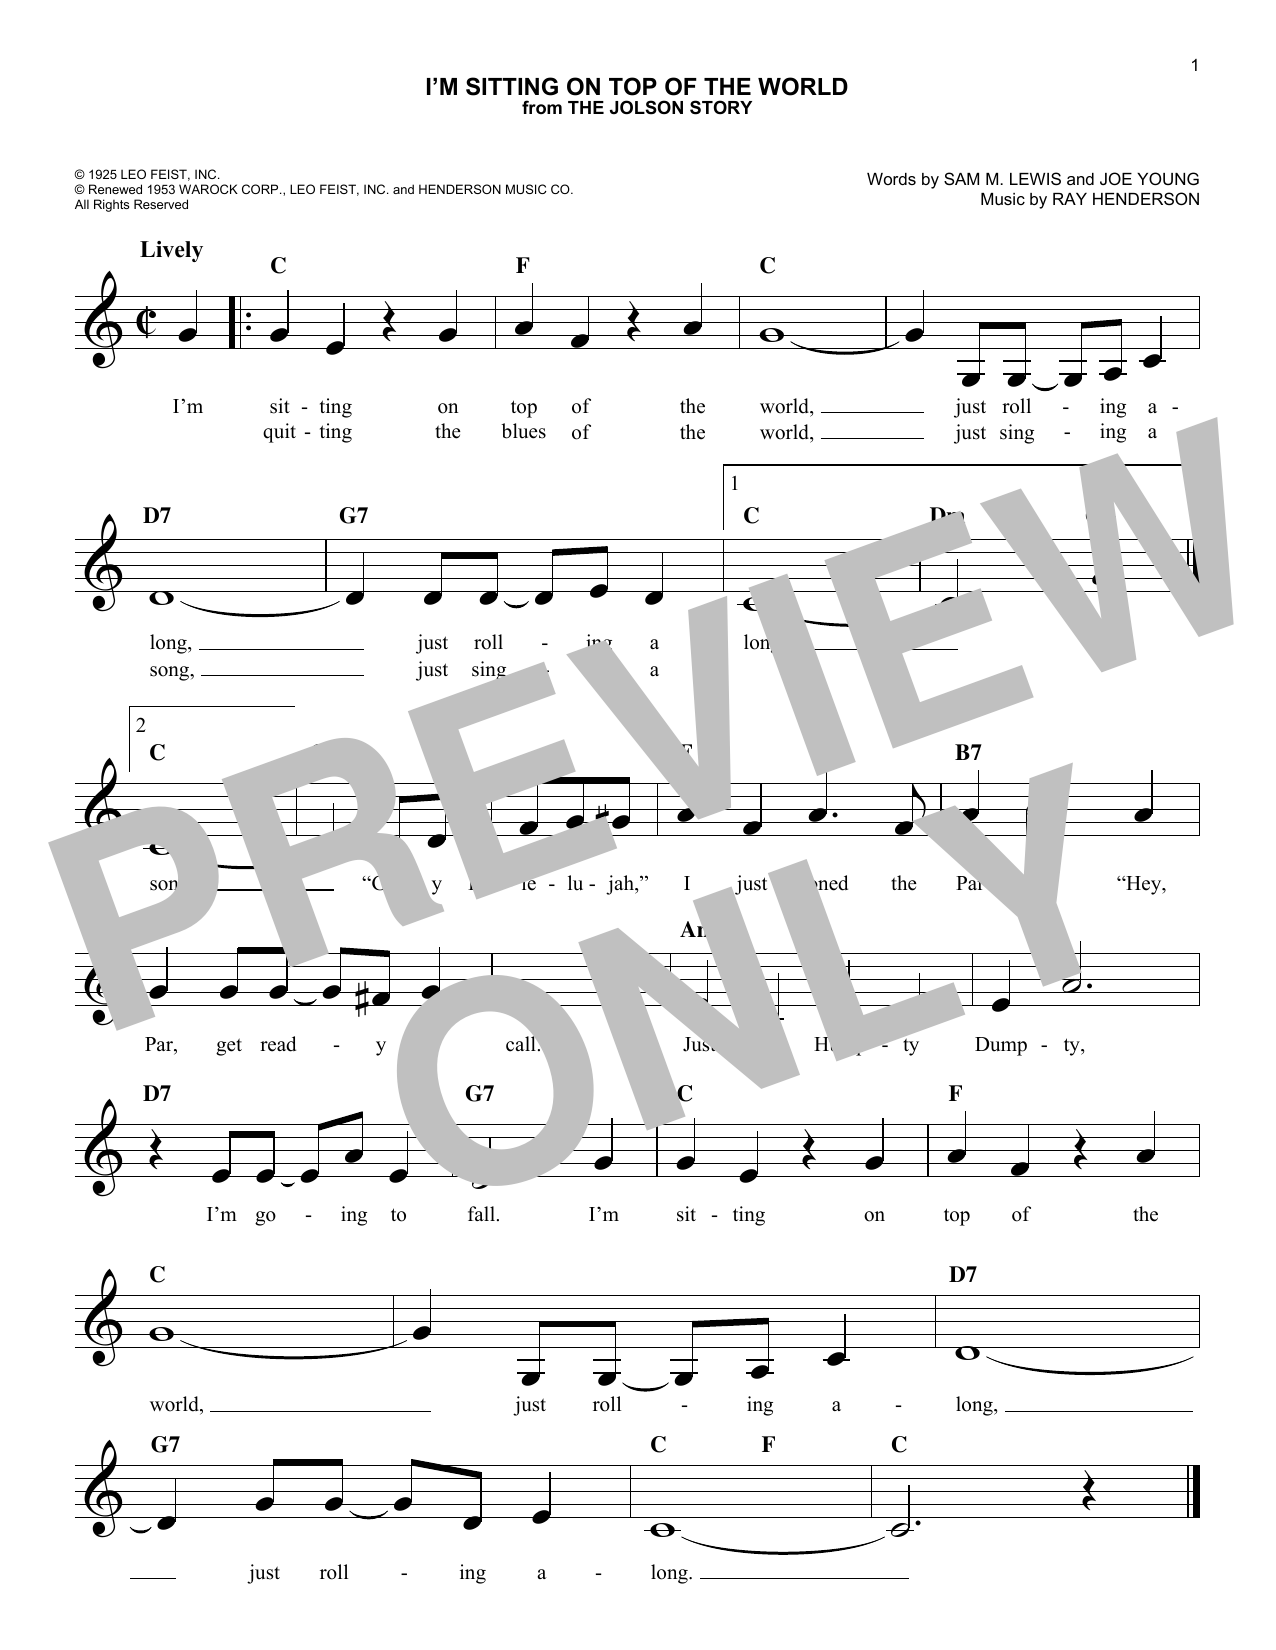 Joe Young "I'm Sitting On Top Of The World" Sheet Music PDF Chords | Standards Score Lead Sheet / Fake Book Download SKU: 194005